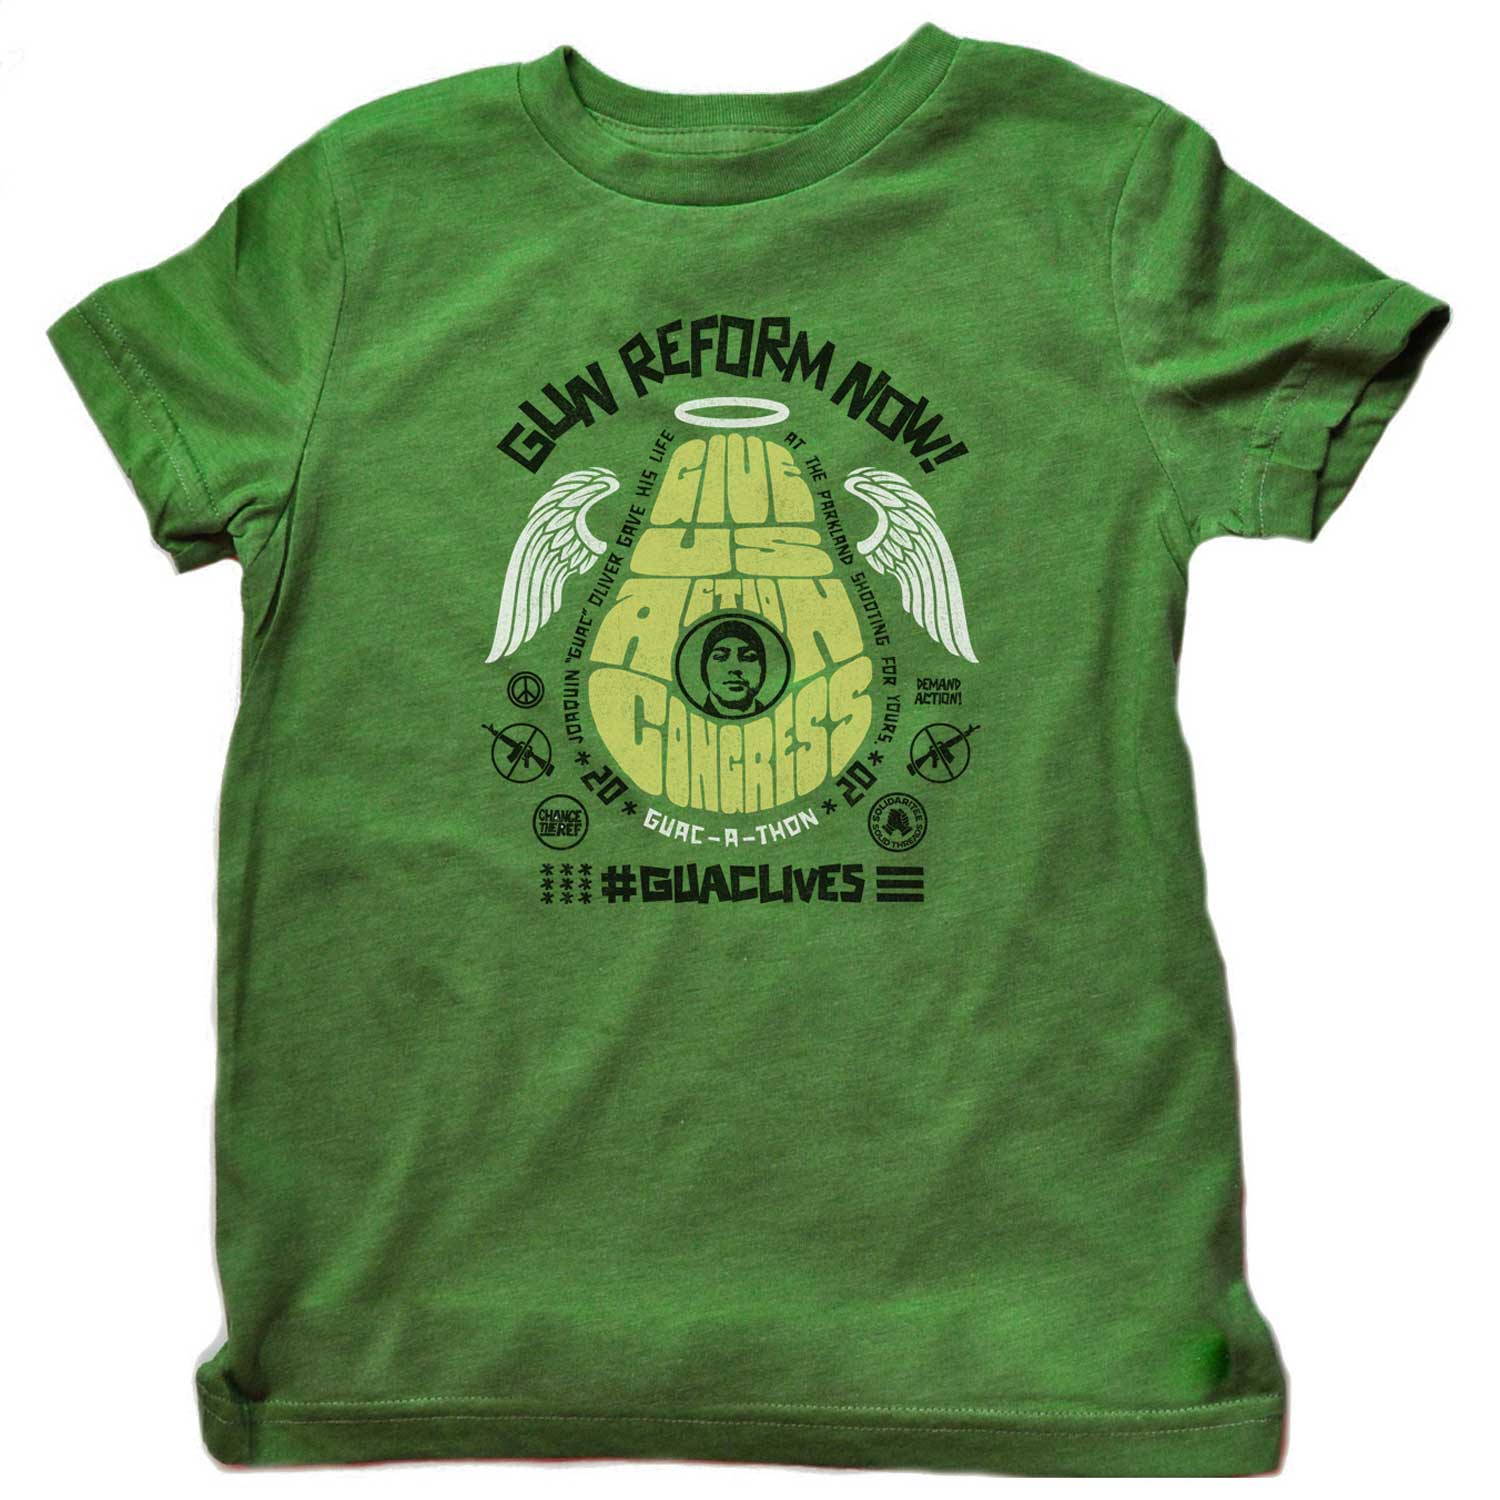 Kid's Guac live give us action congress vintage inspired gun reform tee shirt with cool retro protest graphic | #GUAClives in SolidariTEE with Change The Ref